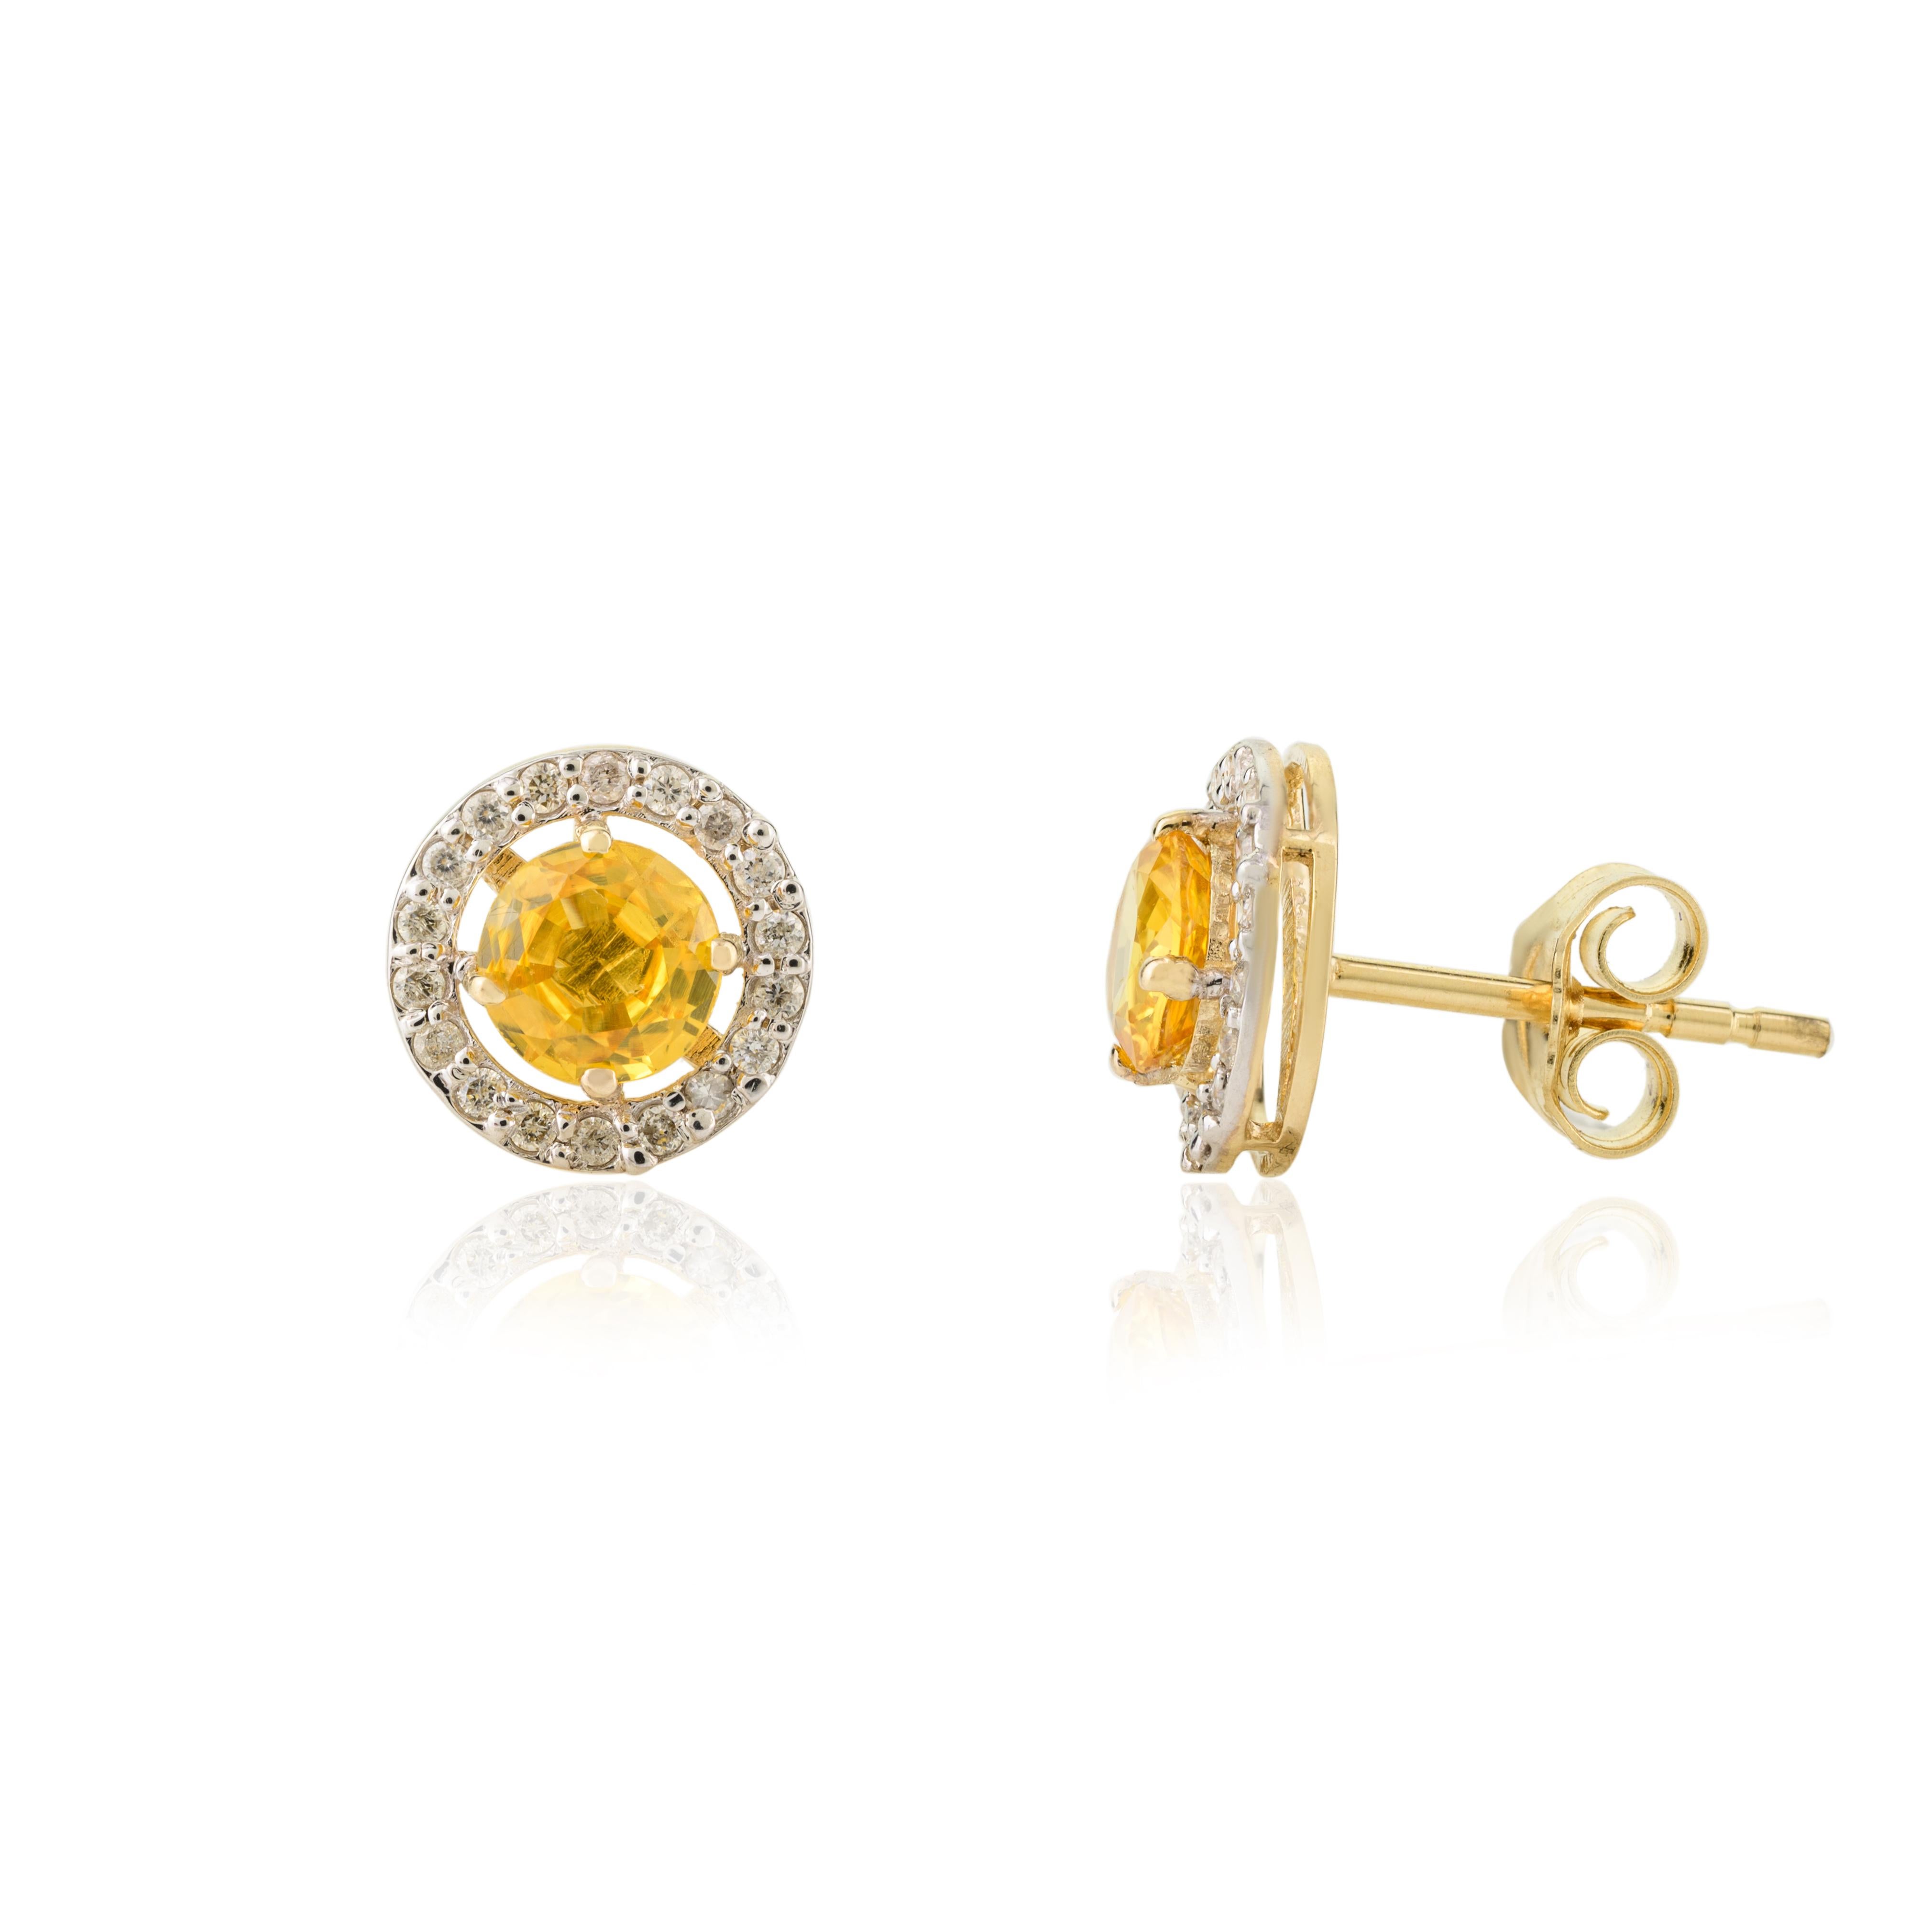 1 Carat Round Yellow Sapphire Diamond Halo Stud Earrings in 14k Yellow Gold In New Condition For Sale In Houston, TX